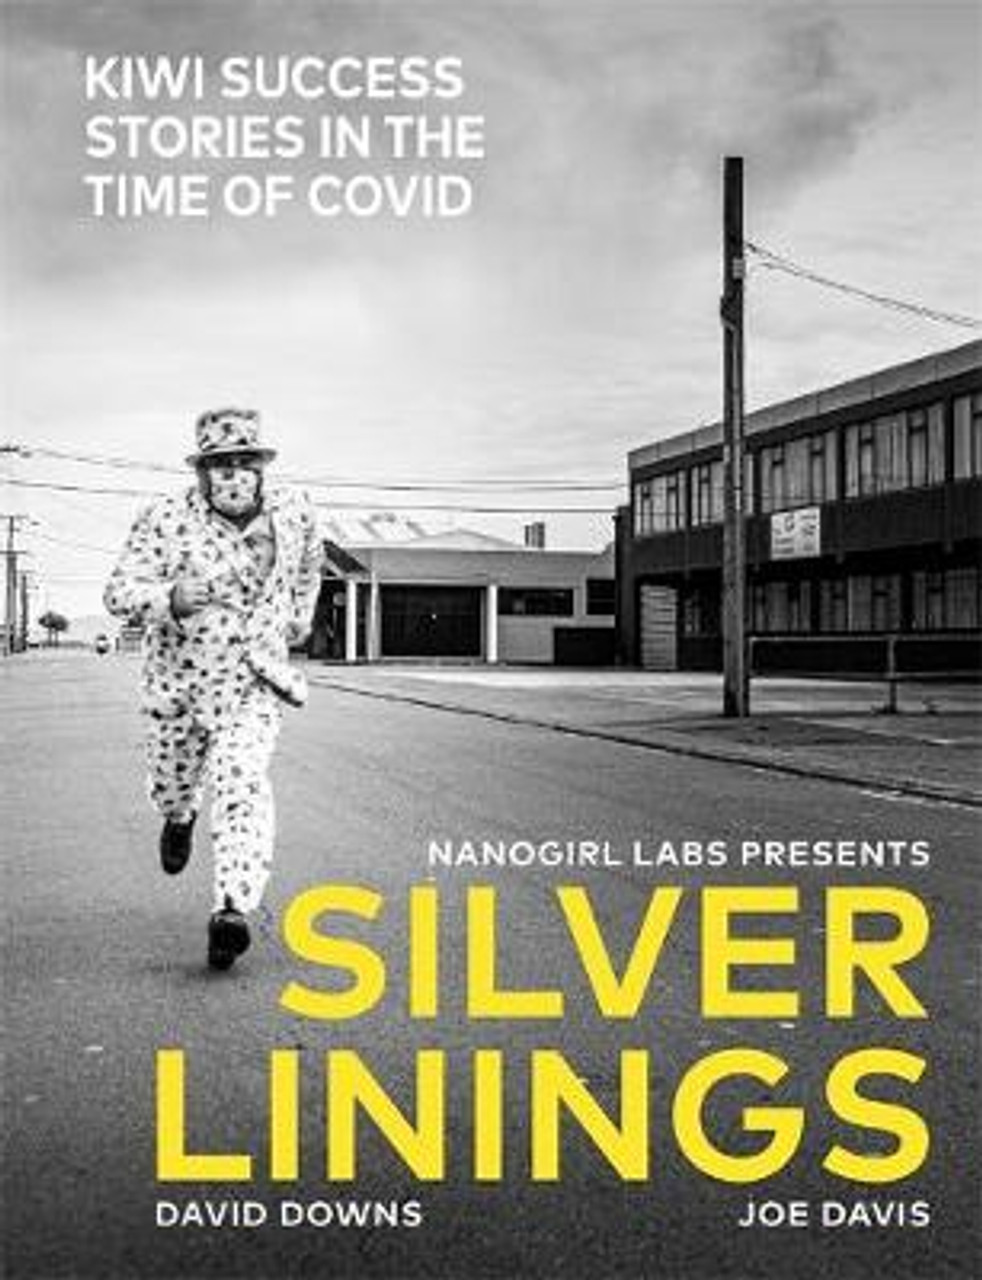 Silver Linings - Kiwi Success Stories in the Time of Covid - Downs, David and Davis, Joe